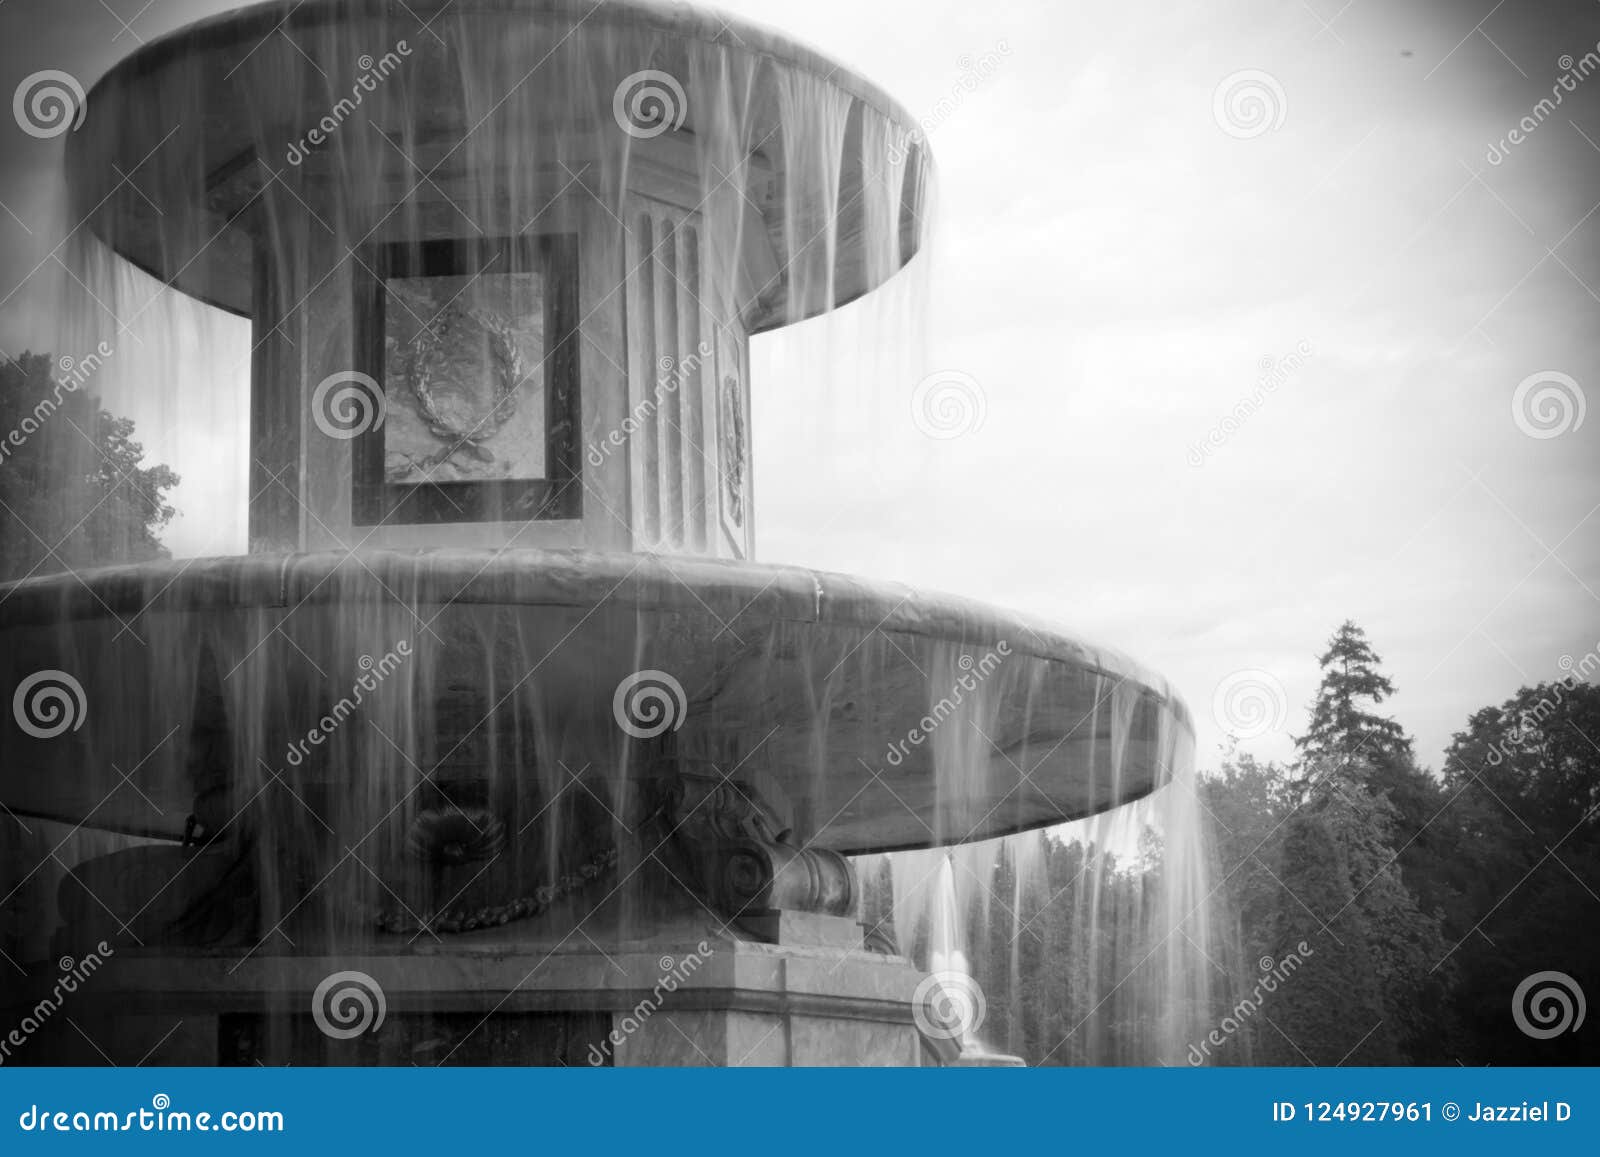 one of the two roman fountains in peterhof, russia